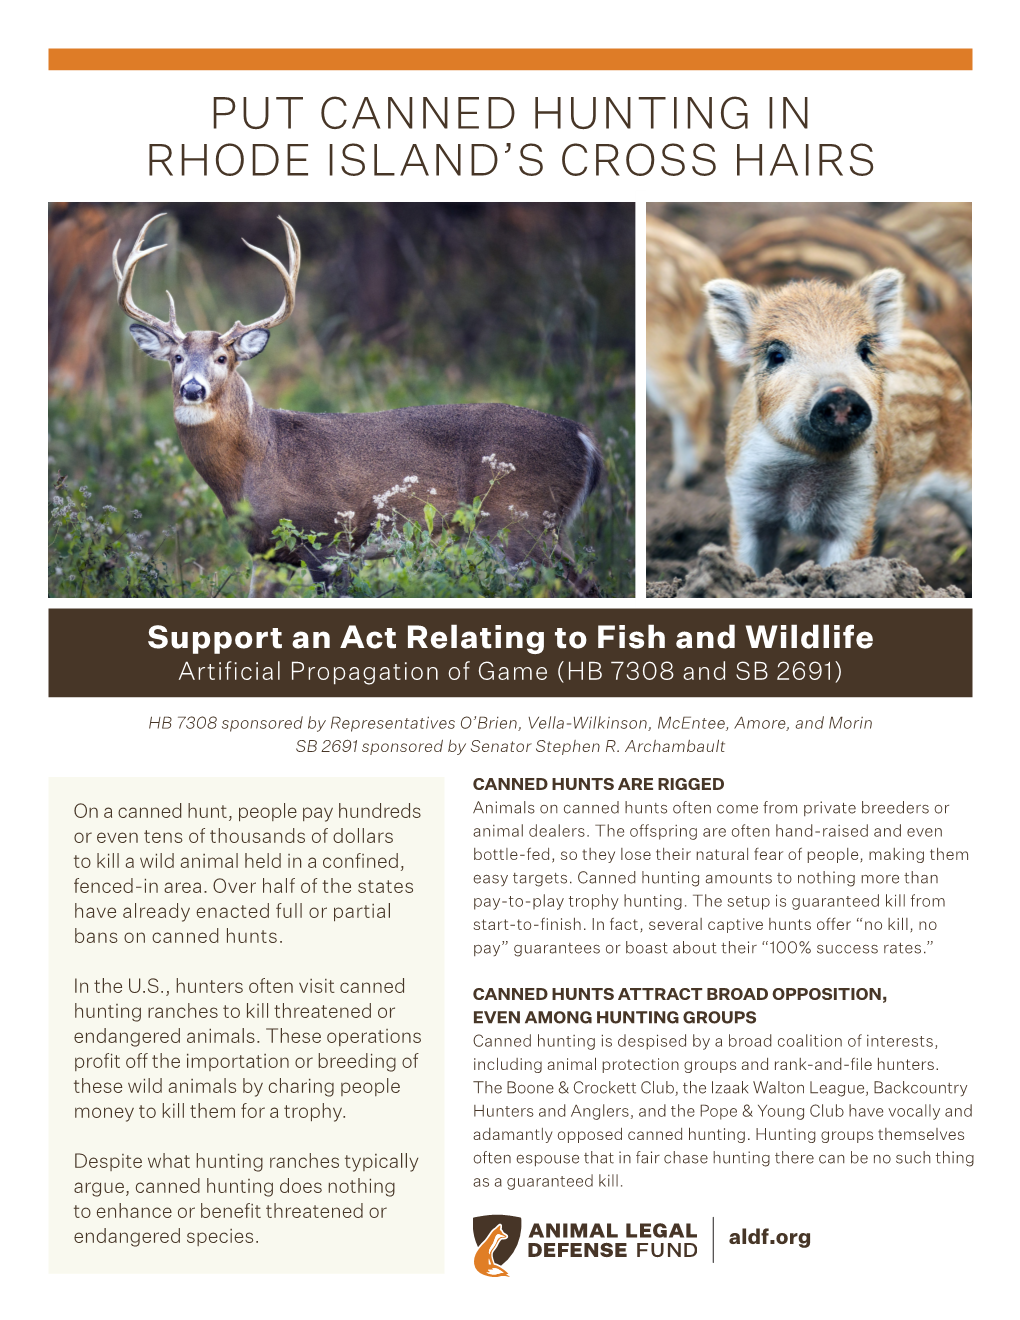 Put Canned Hunting in Rhode Island's Cross Hairs